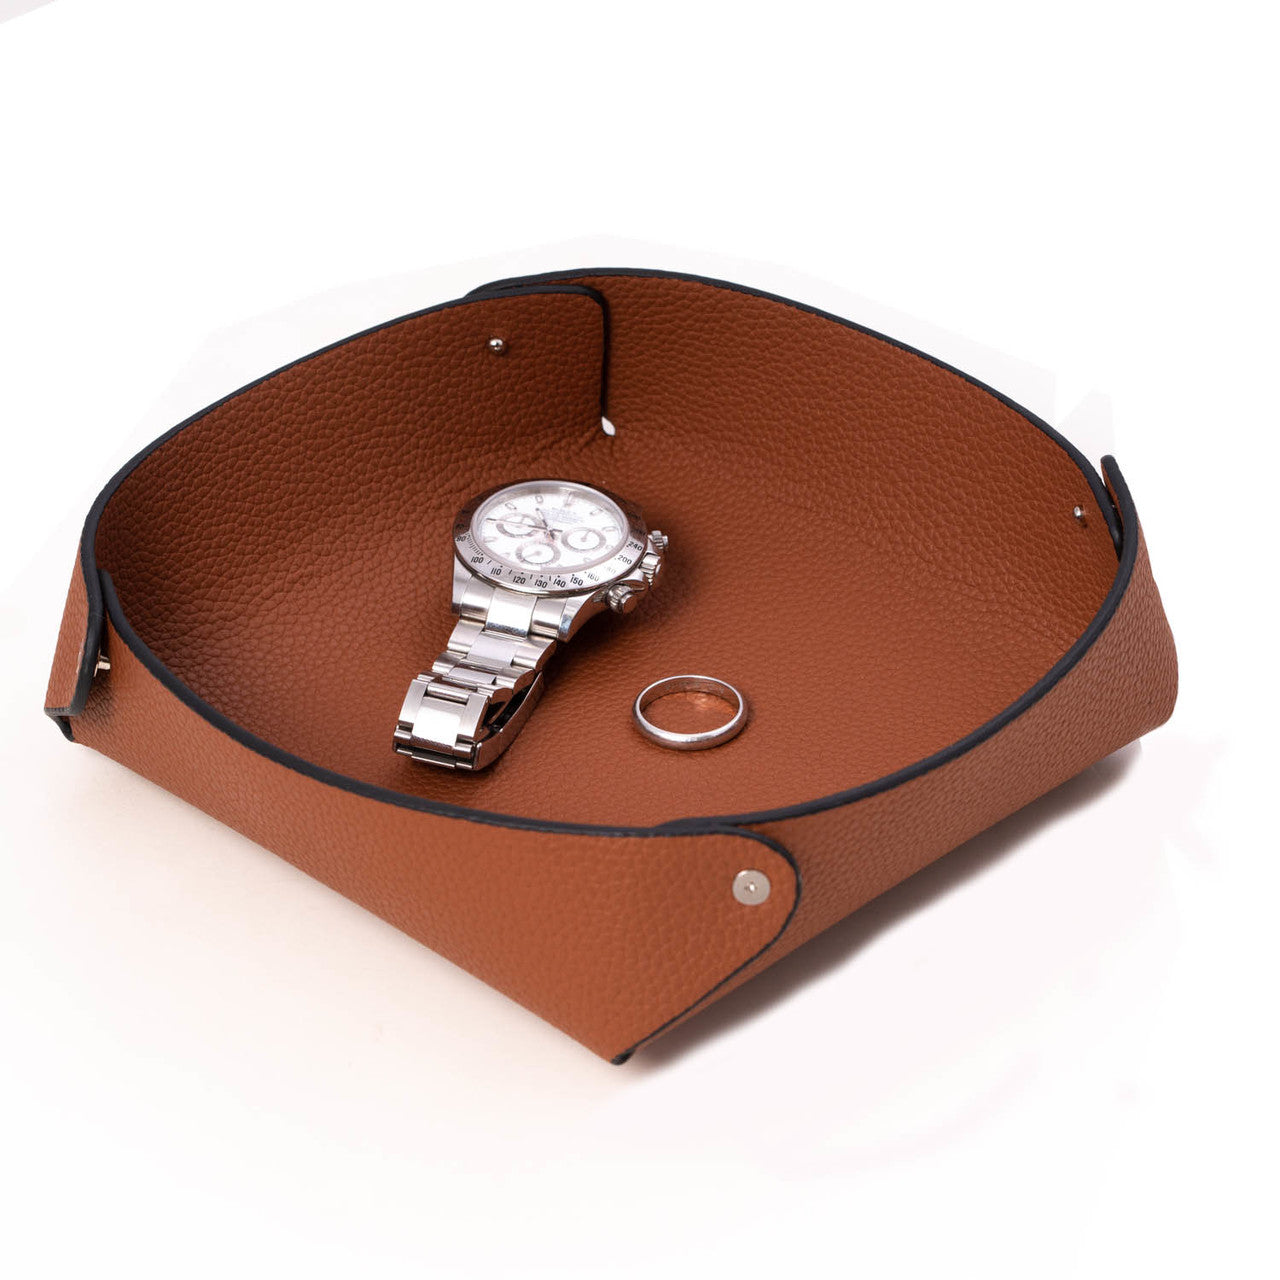 Leather Catchall Valet Tray In Lay Flat Design.